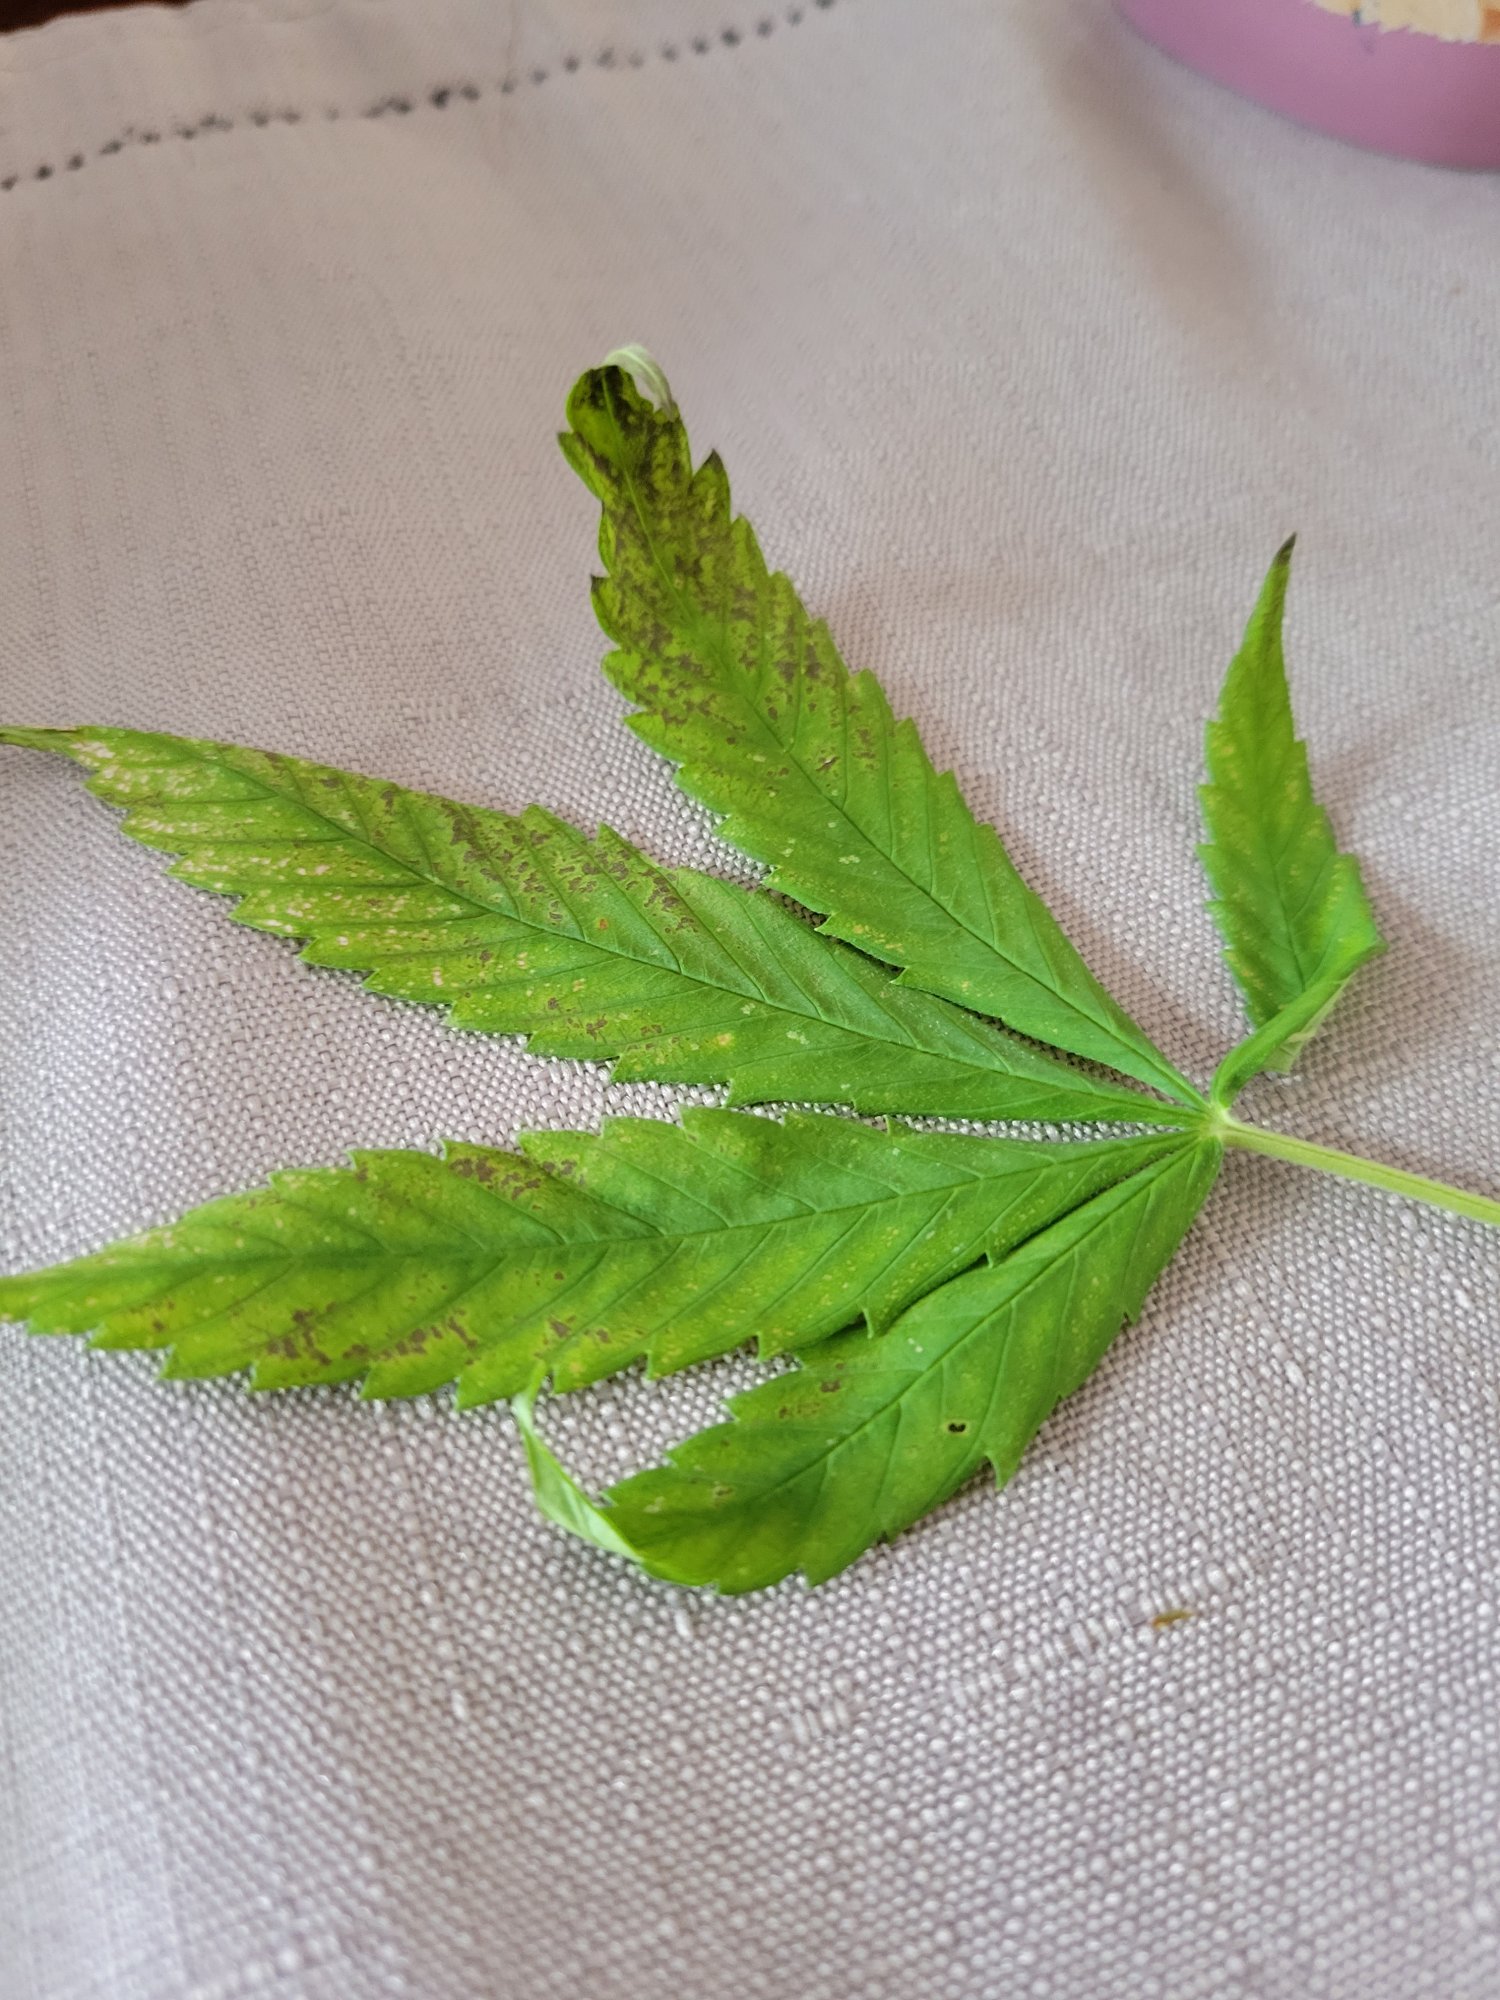 Help please identifying nutes problem